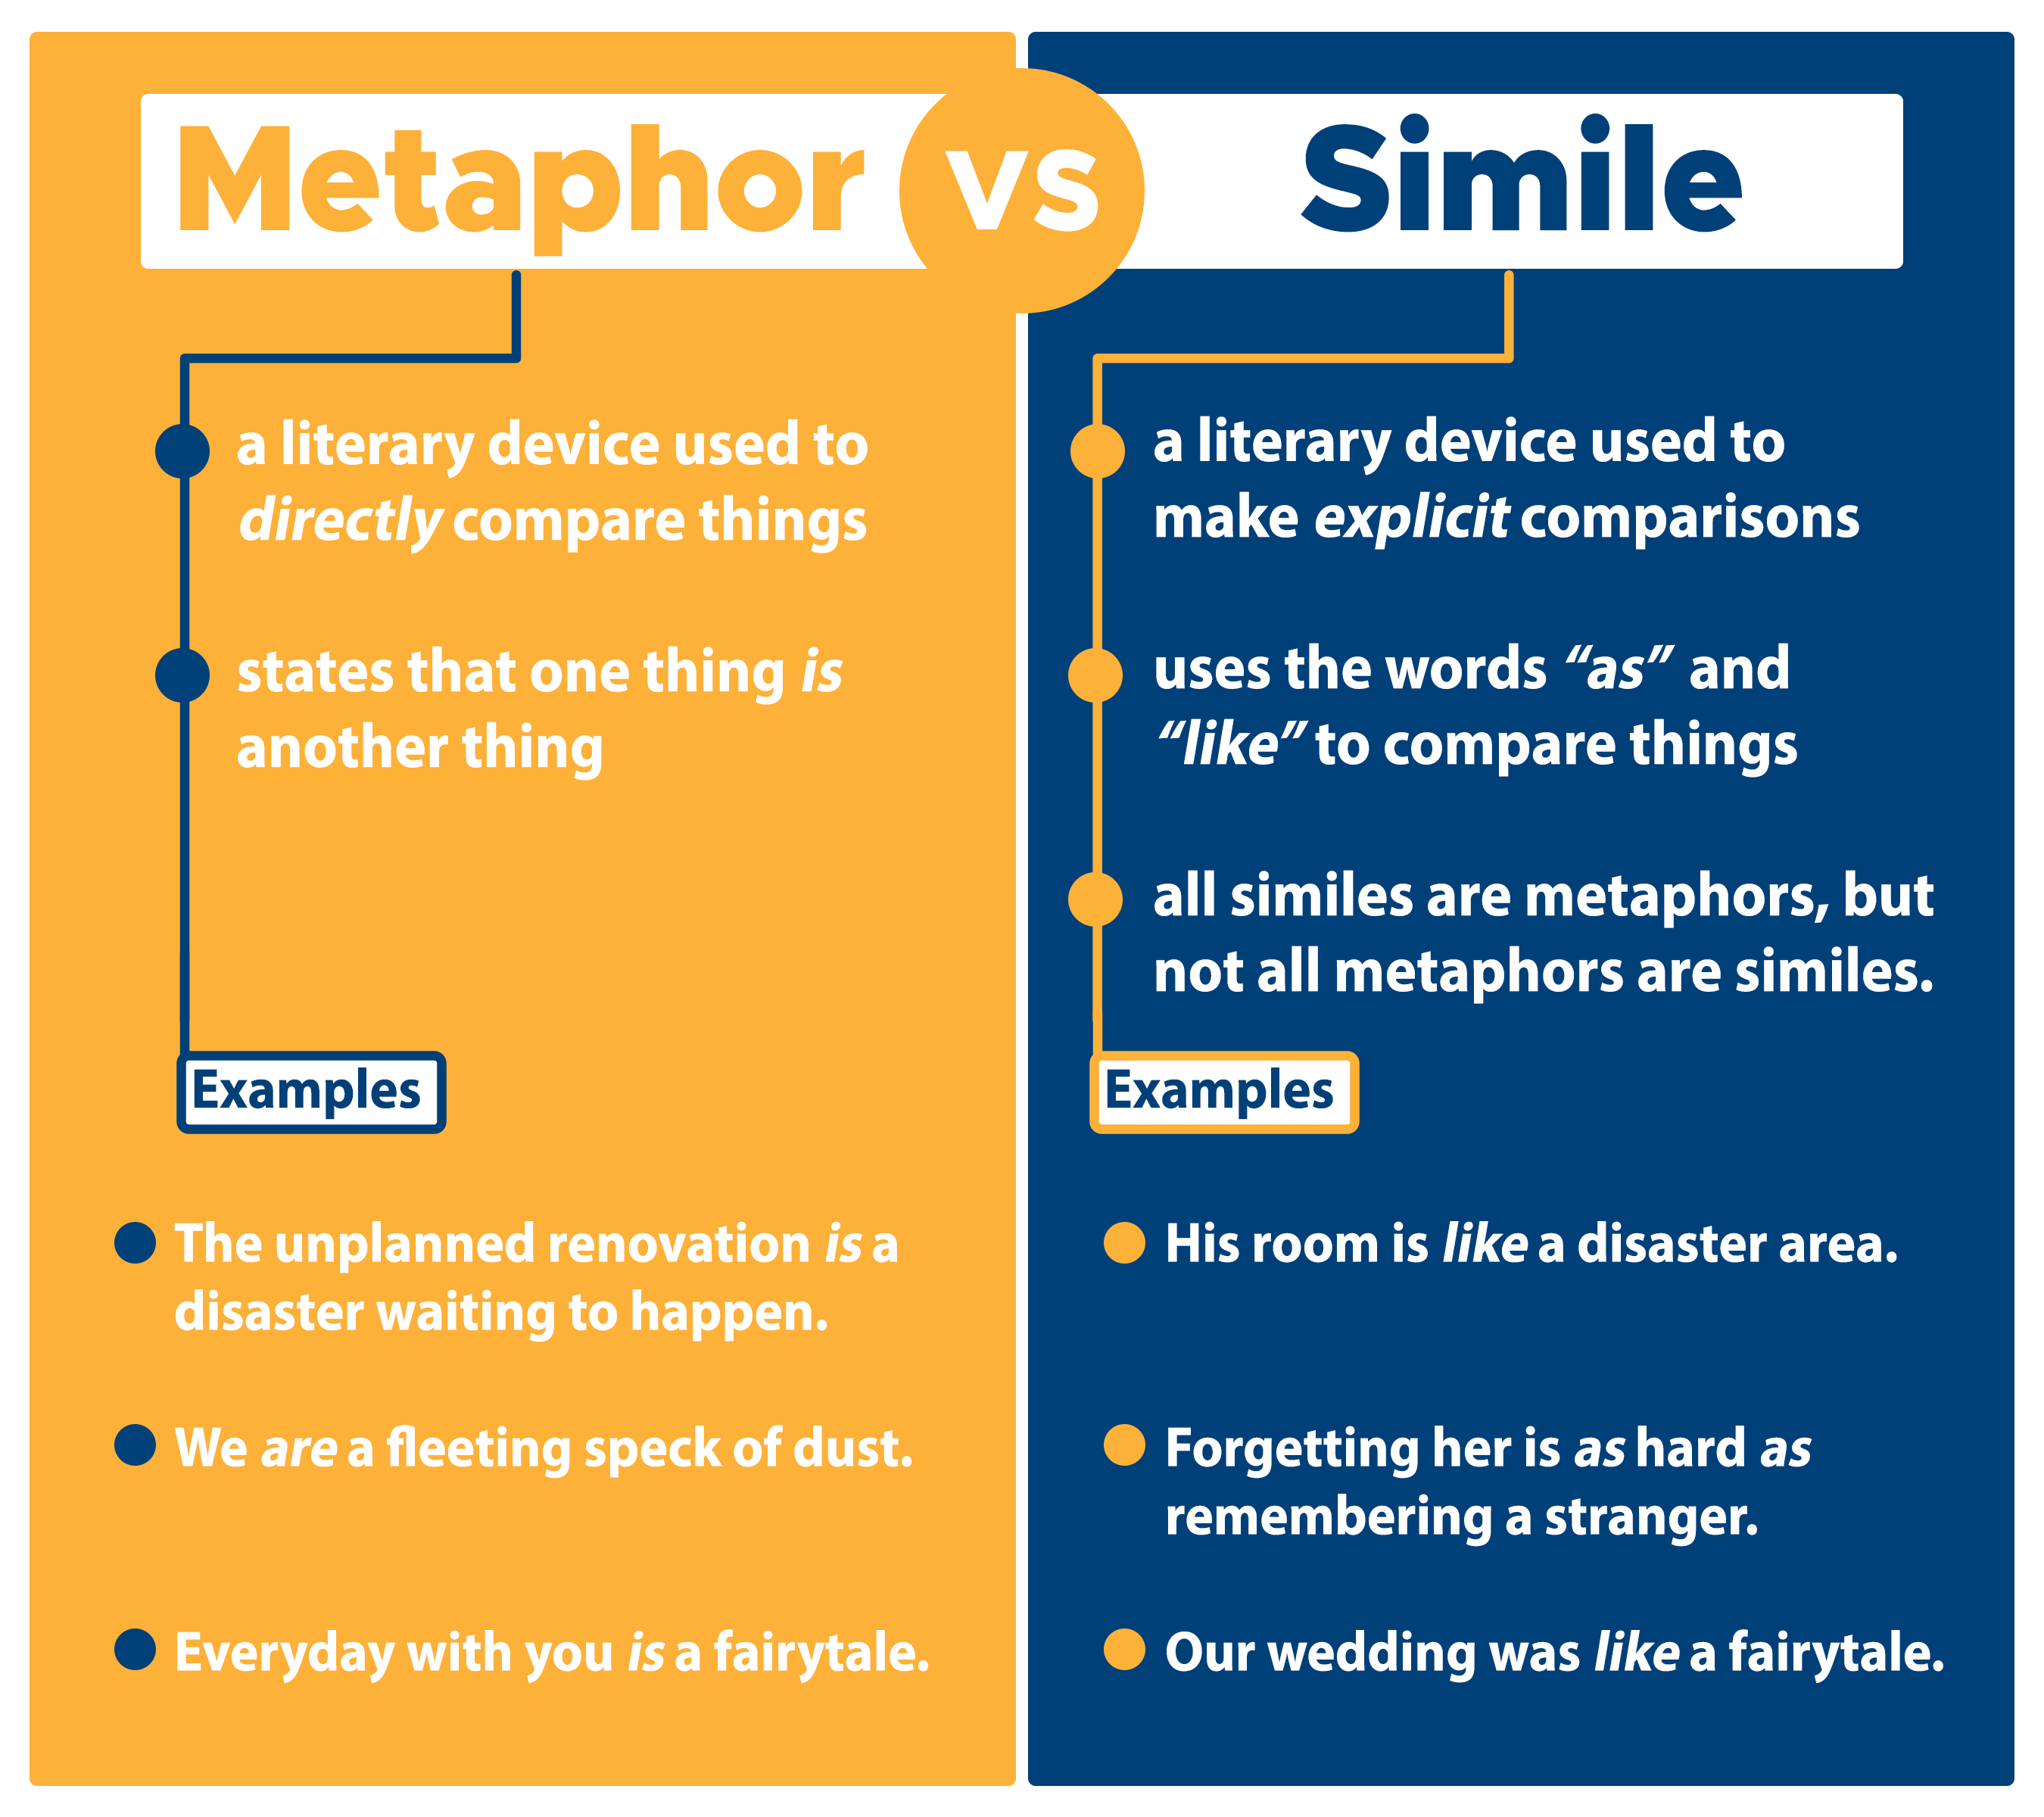 Metaphor vs Simile difference and examples